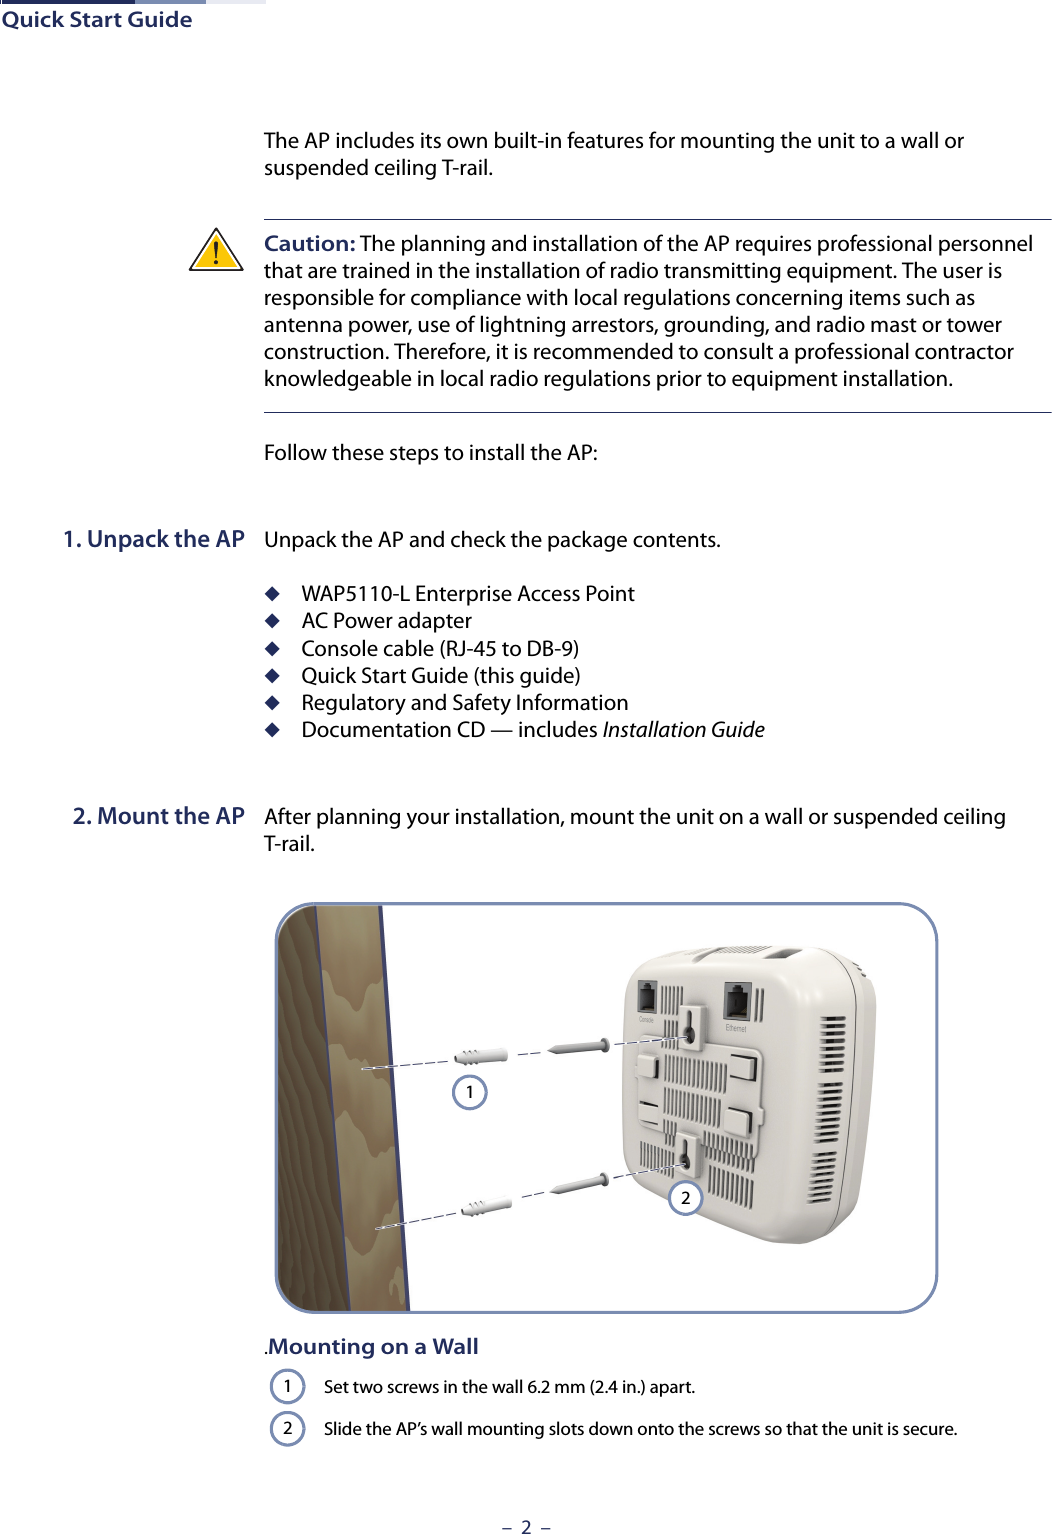 Quick Start Guide–  2  –The AP includes its own built-in features for mounting the unit to a wall or suspended ceiling T-rail. Caution: The planning and installation of the AP requires professional personnel that are trained in the installation of radio transmitting equipment. The user is responsible for compliance with local regulations concerning items such as antenna power, use of lightning arrestors, grounding, and radio mast or tower construction. Therefore, it is recommended to consult a professional contractor knowledgeable in local radio regulations prior to equipment installation.Follow these steps to install the AP:1. Unpack the AP Unpack the AP and check the package contents.◆WAP5110-L Enterprise Access Point◆AC Power adapter◆Console cable (RJ-45 to DB-9)◆Quick Start Guide (this guide)◆Regulatory and Safety Information◆Documentation CD — includes Installation Guide 2. Mount the AP After planning your installation, mount the unit on a wall or suspended ceiling T-rail. .Mounting on a WallSet two screws in the wall 6.2 mm (2.4 in.) apart.Slide the AP’s wall mounting slots down onto the screws so that the unit is secure.1212